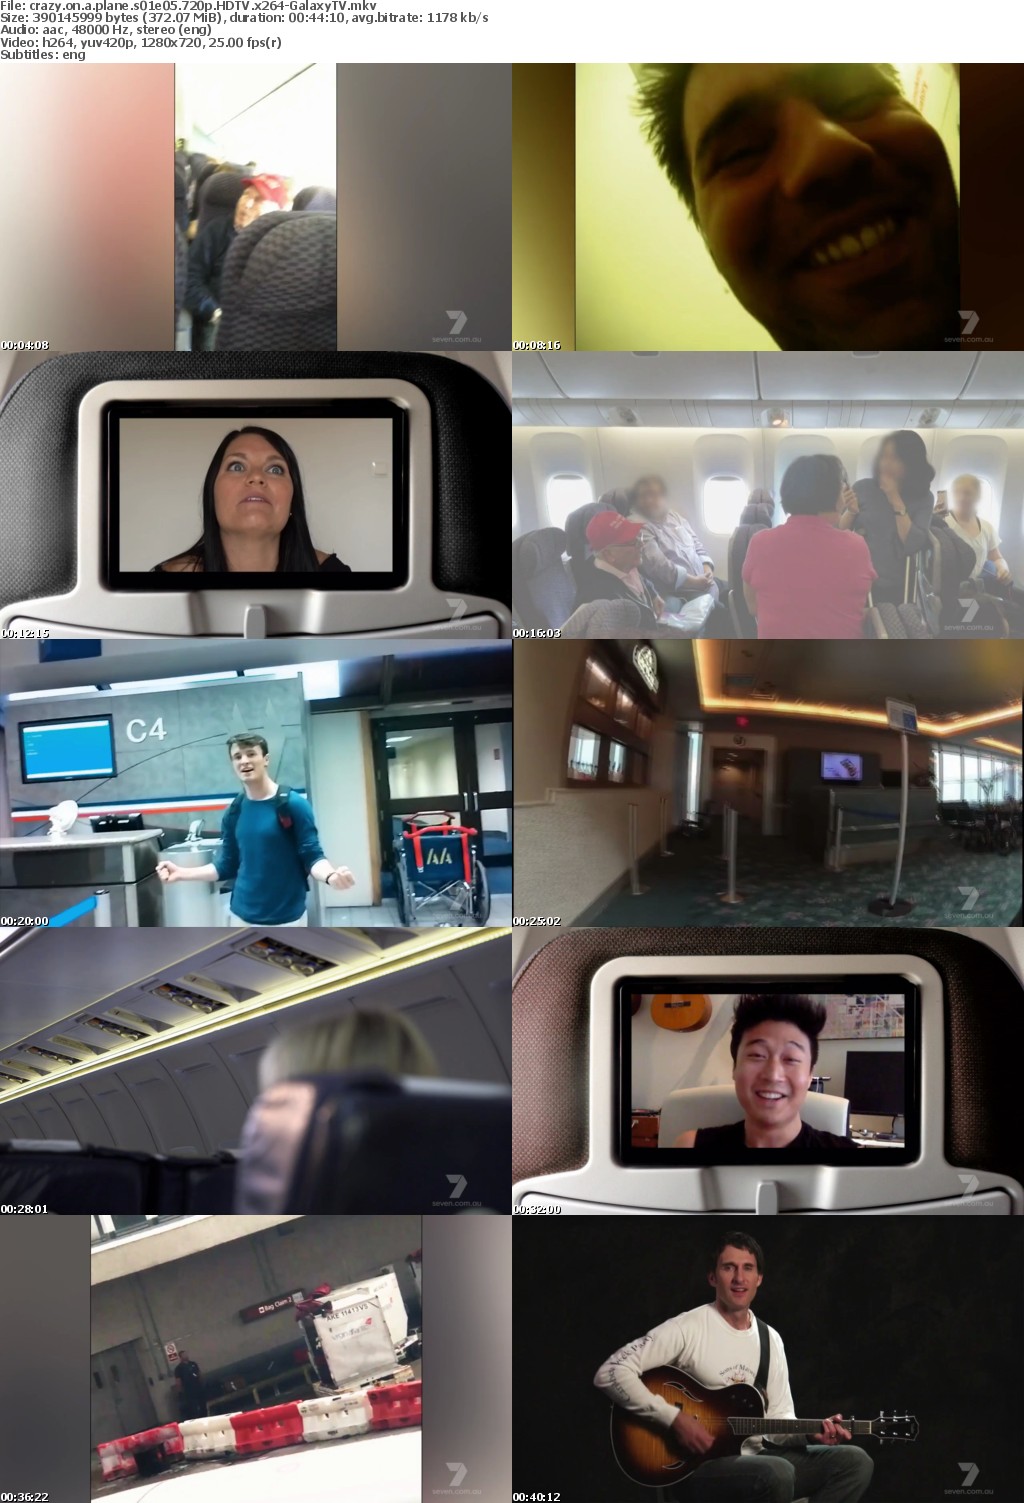 Crazy On A Plane S01 COMPLETE 720p HDTV x264-GalaxyTV